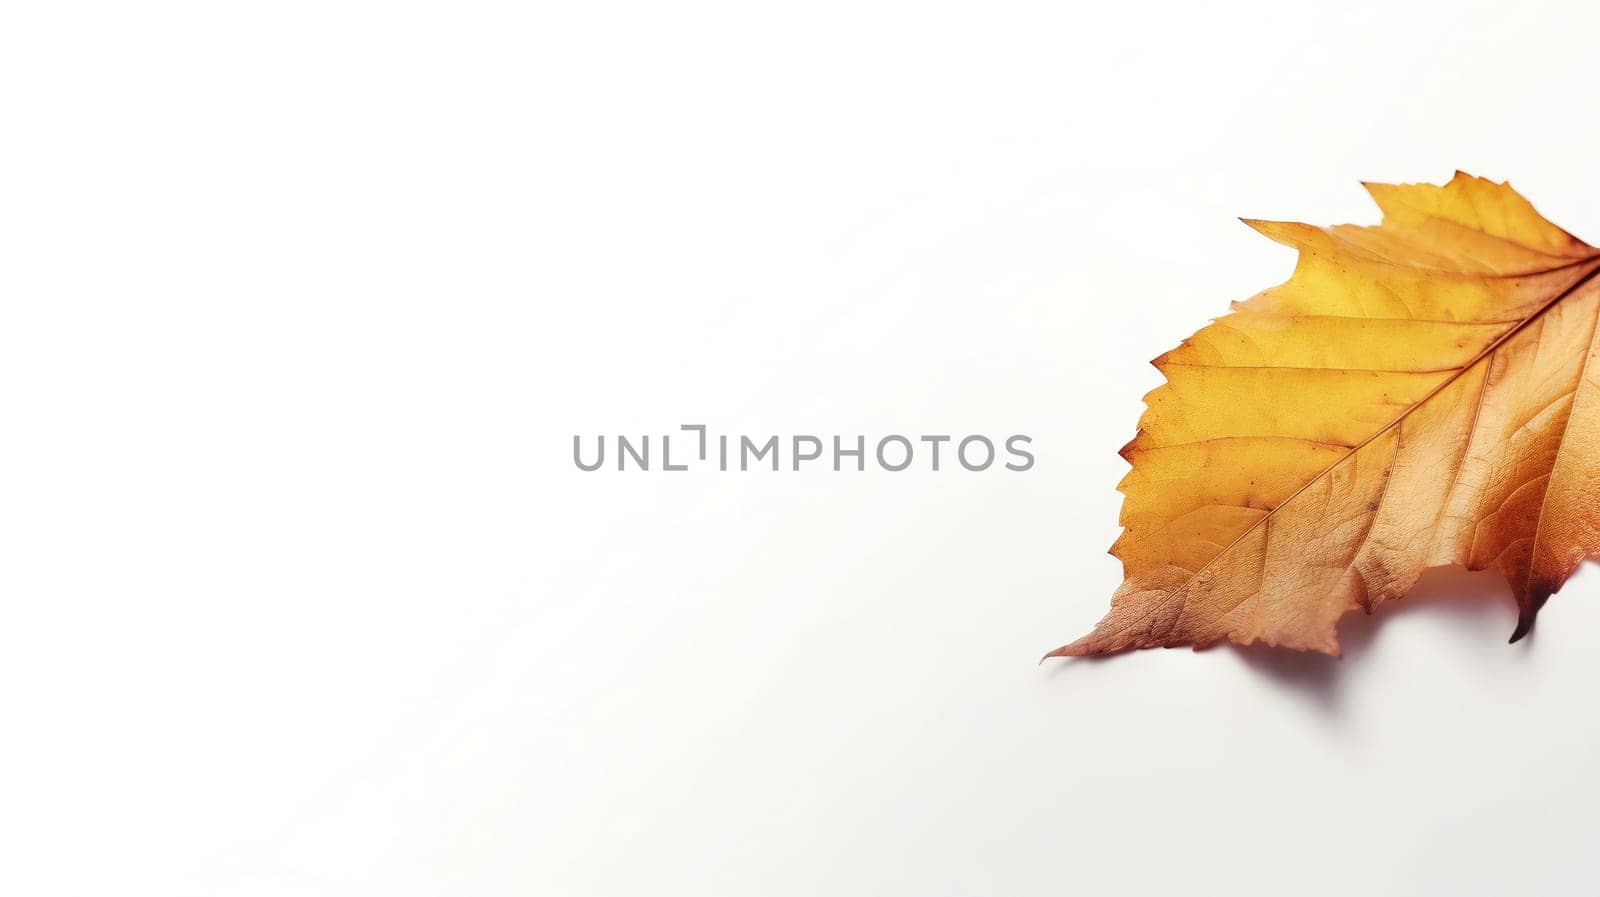 Autumn minimal banner with autumn yellow alder leaf with natural texture on beige background, copy space. Fall colors aesthetic photo with macro leaves with veins, season autumnal foliage, empty space